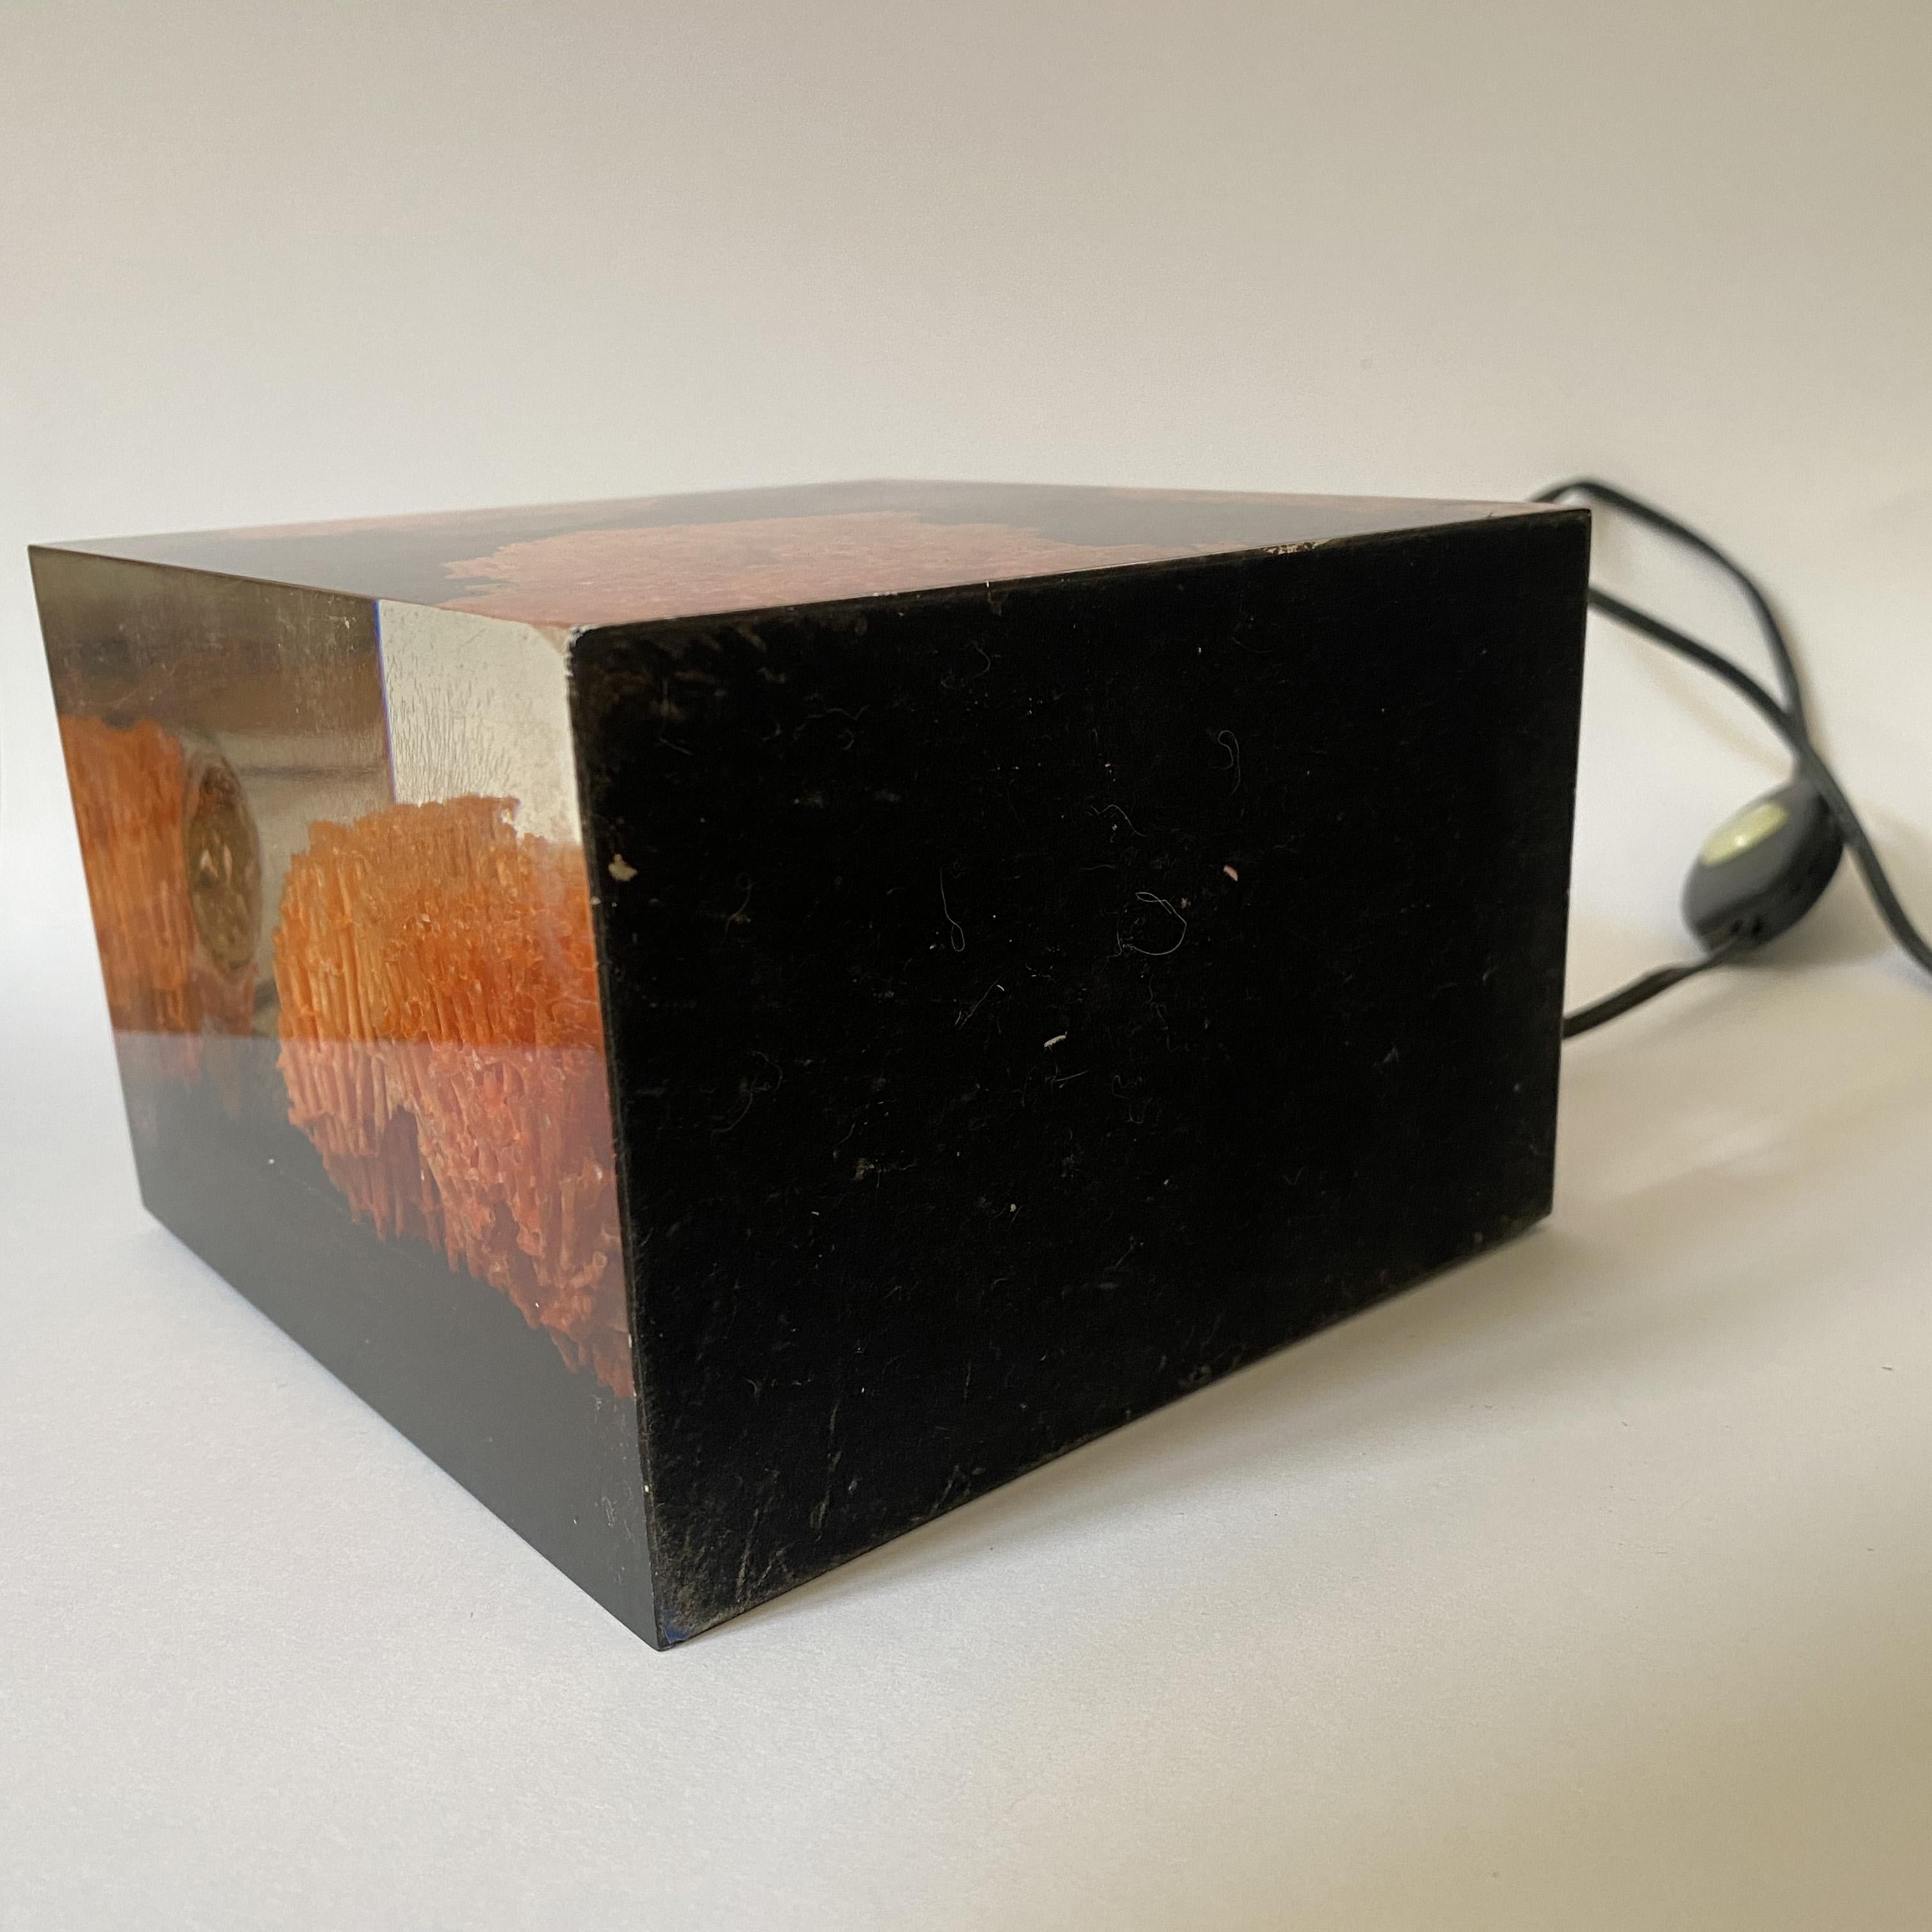 Late 20th Century Acrylic Resin Cube with Coral Inclusion Table Lamp by Pierre Giraudon, 1970s.